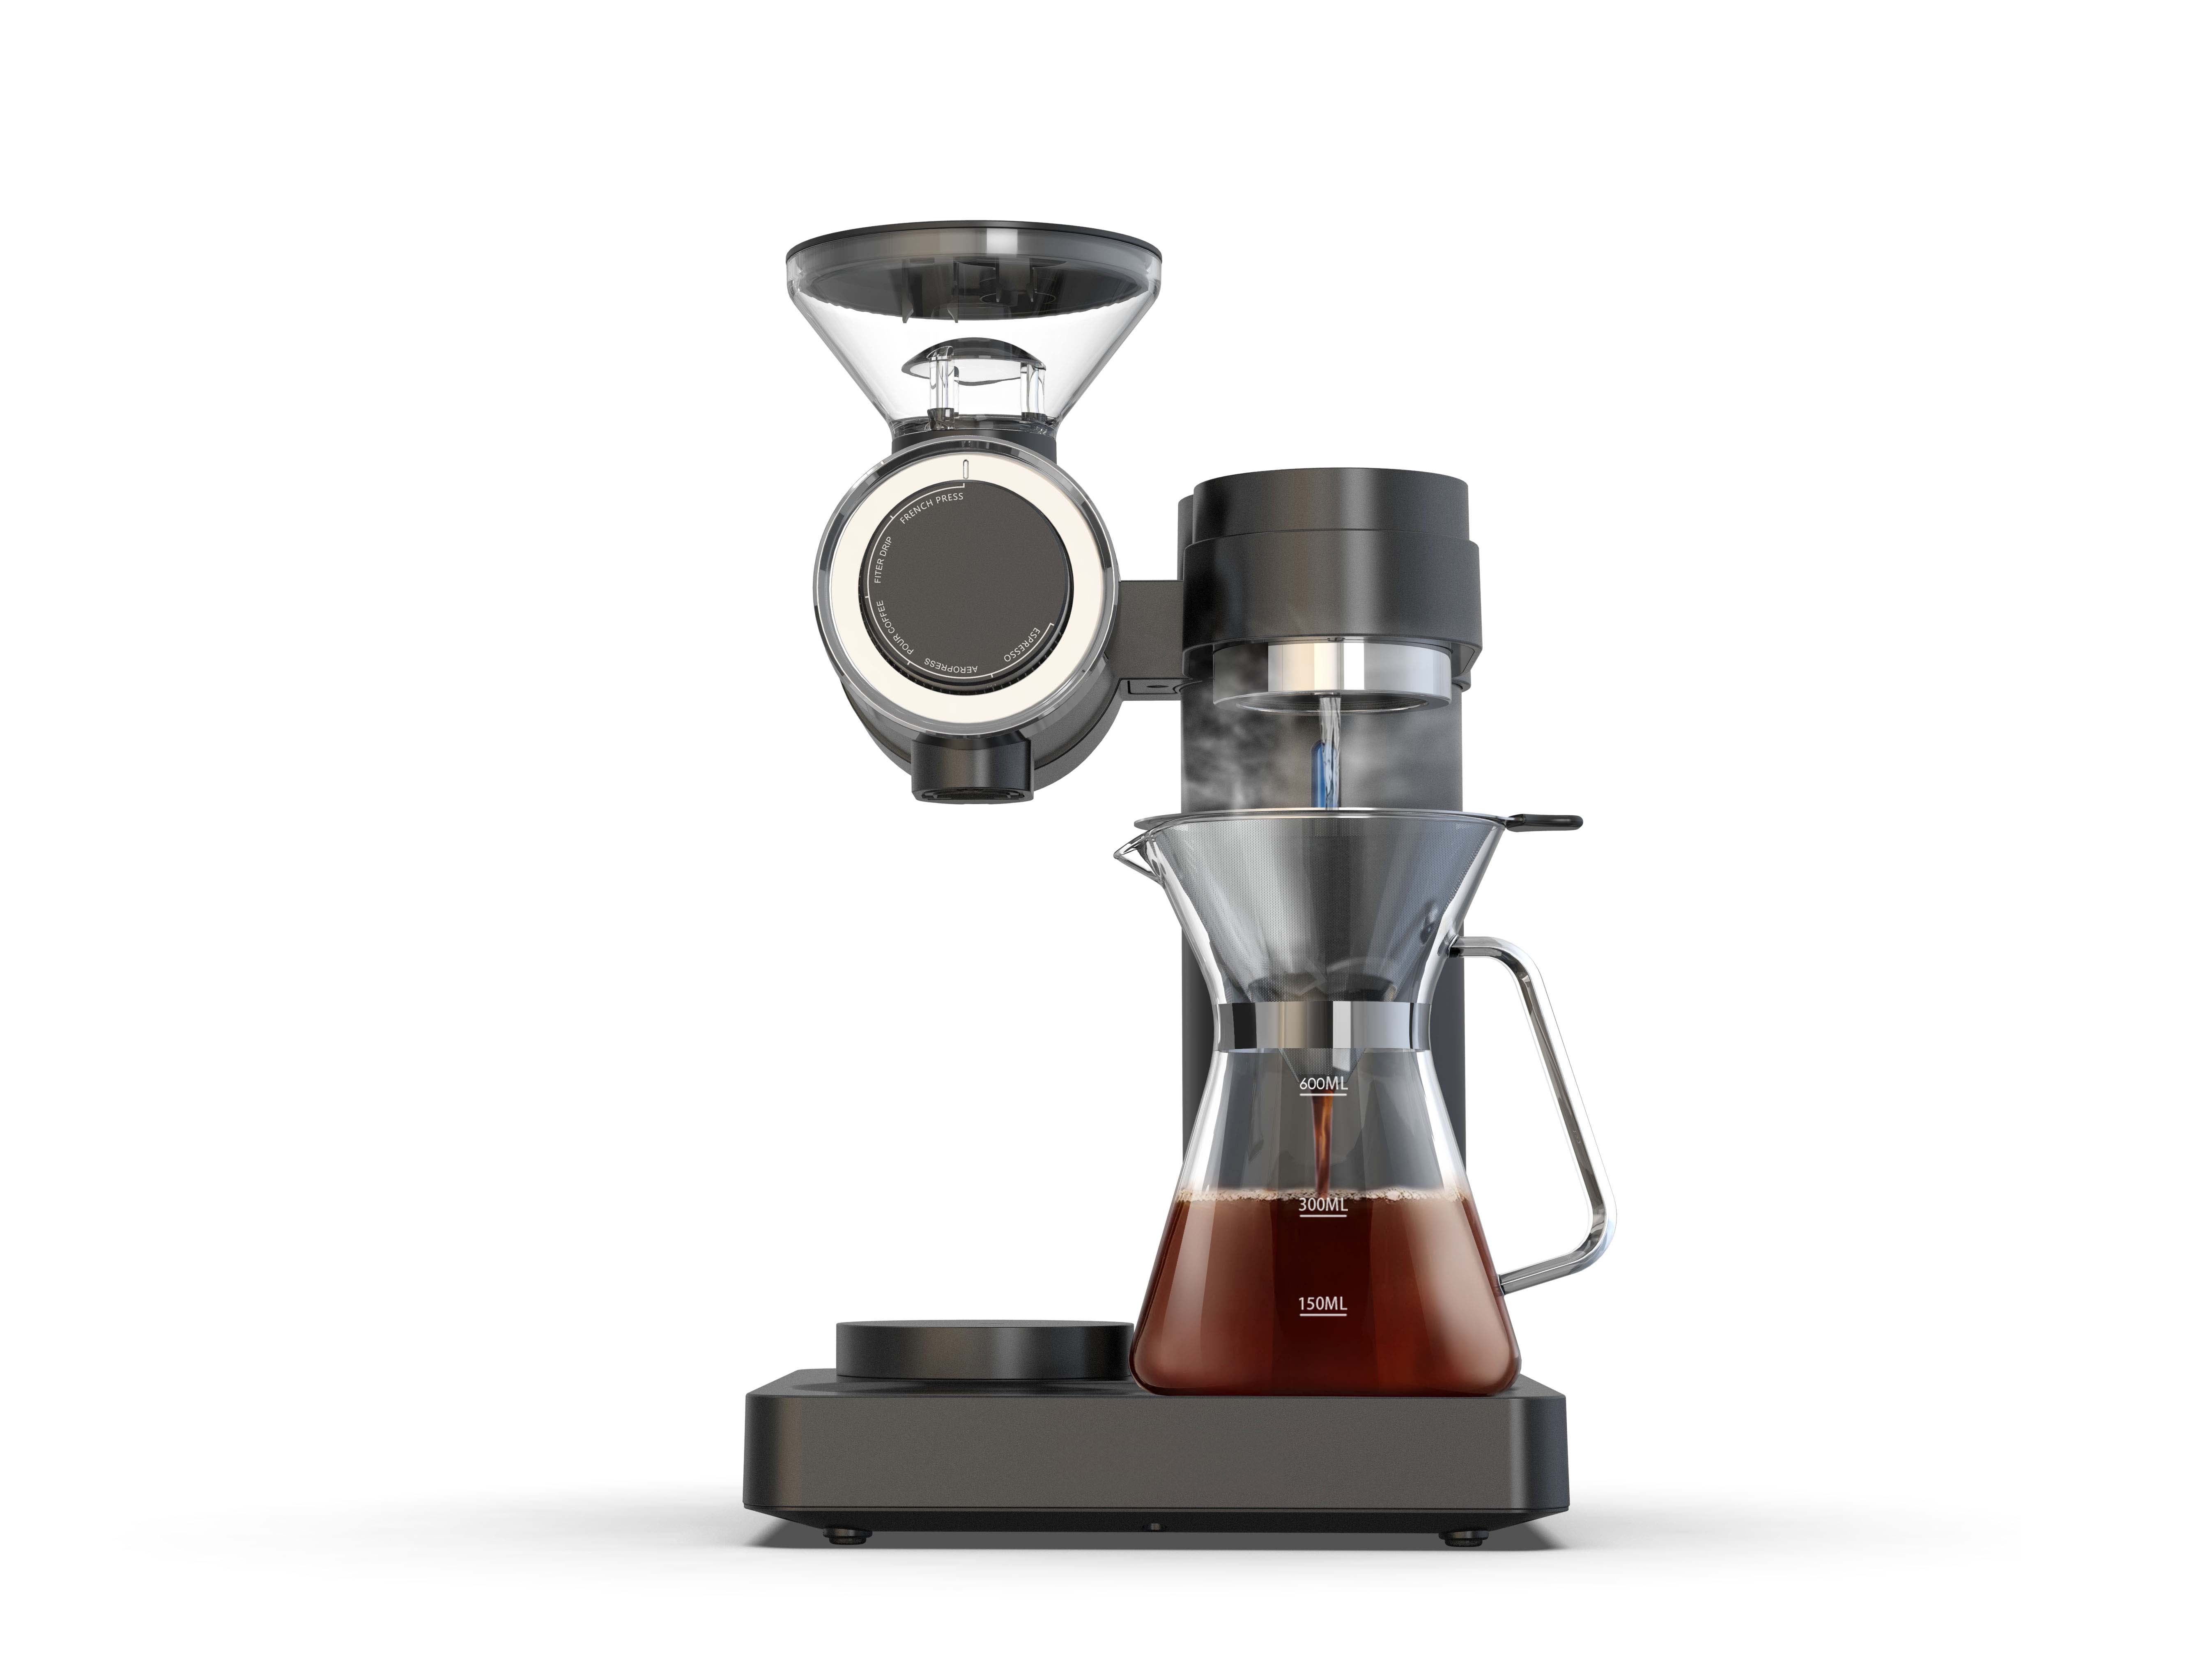 Smart pour-over coffee maker